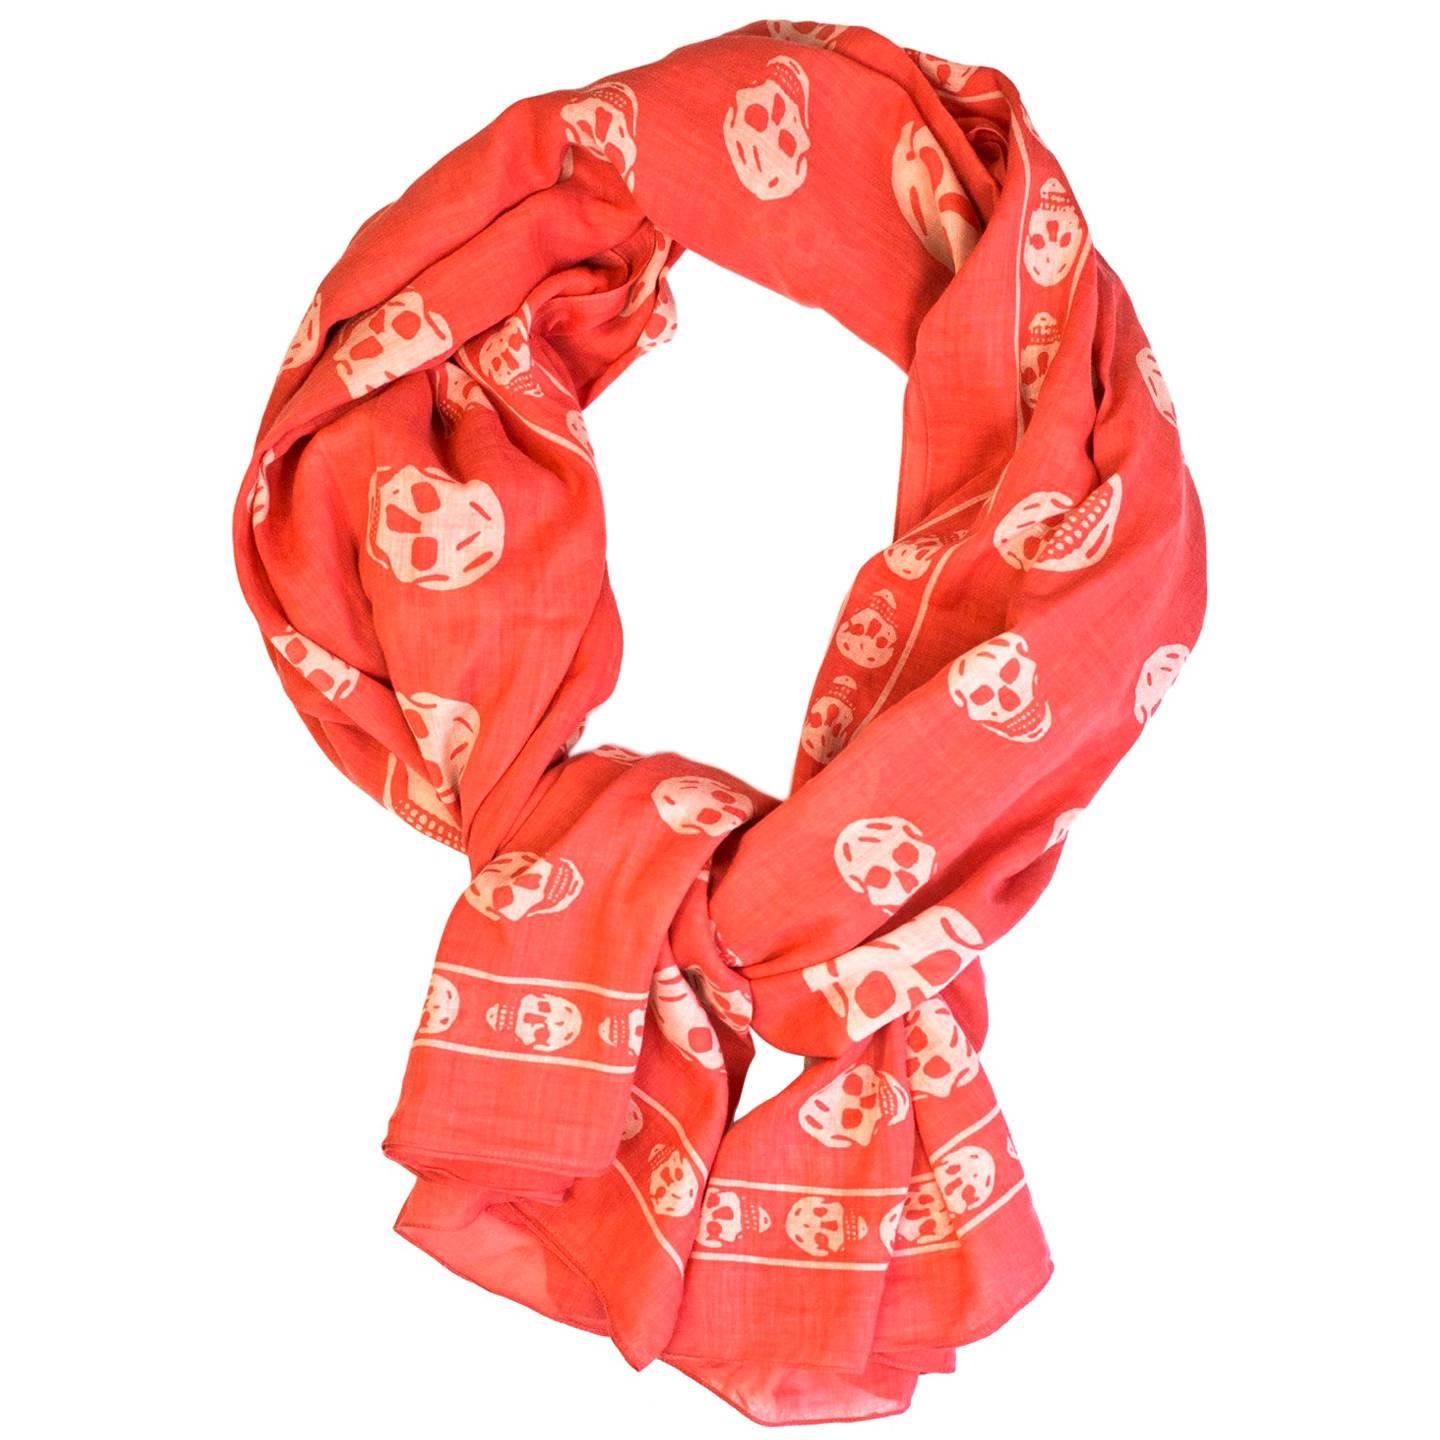 Alexander McQueen Cotton Coral and White Classic Skull XL Scarf